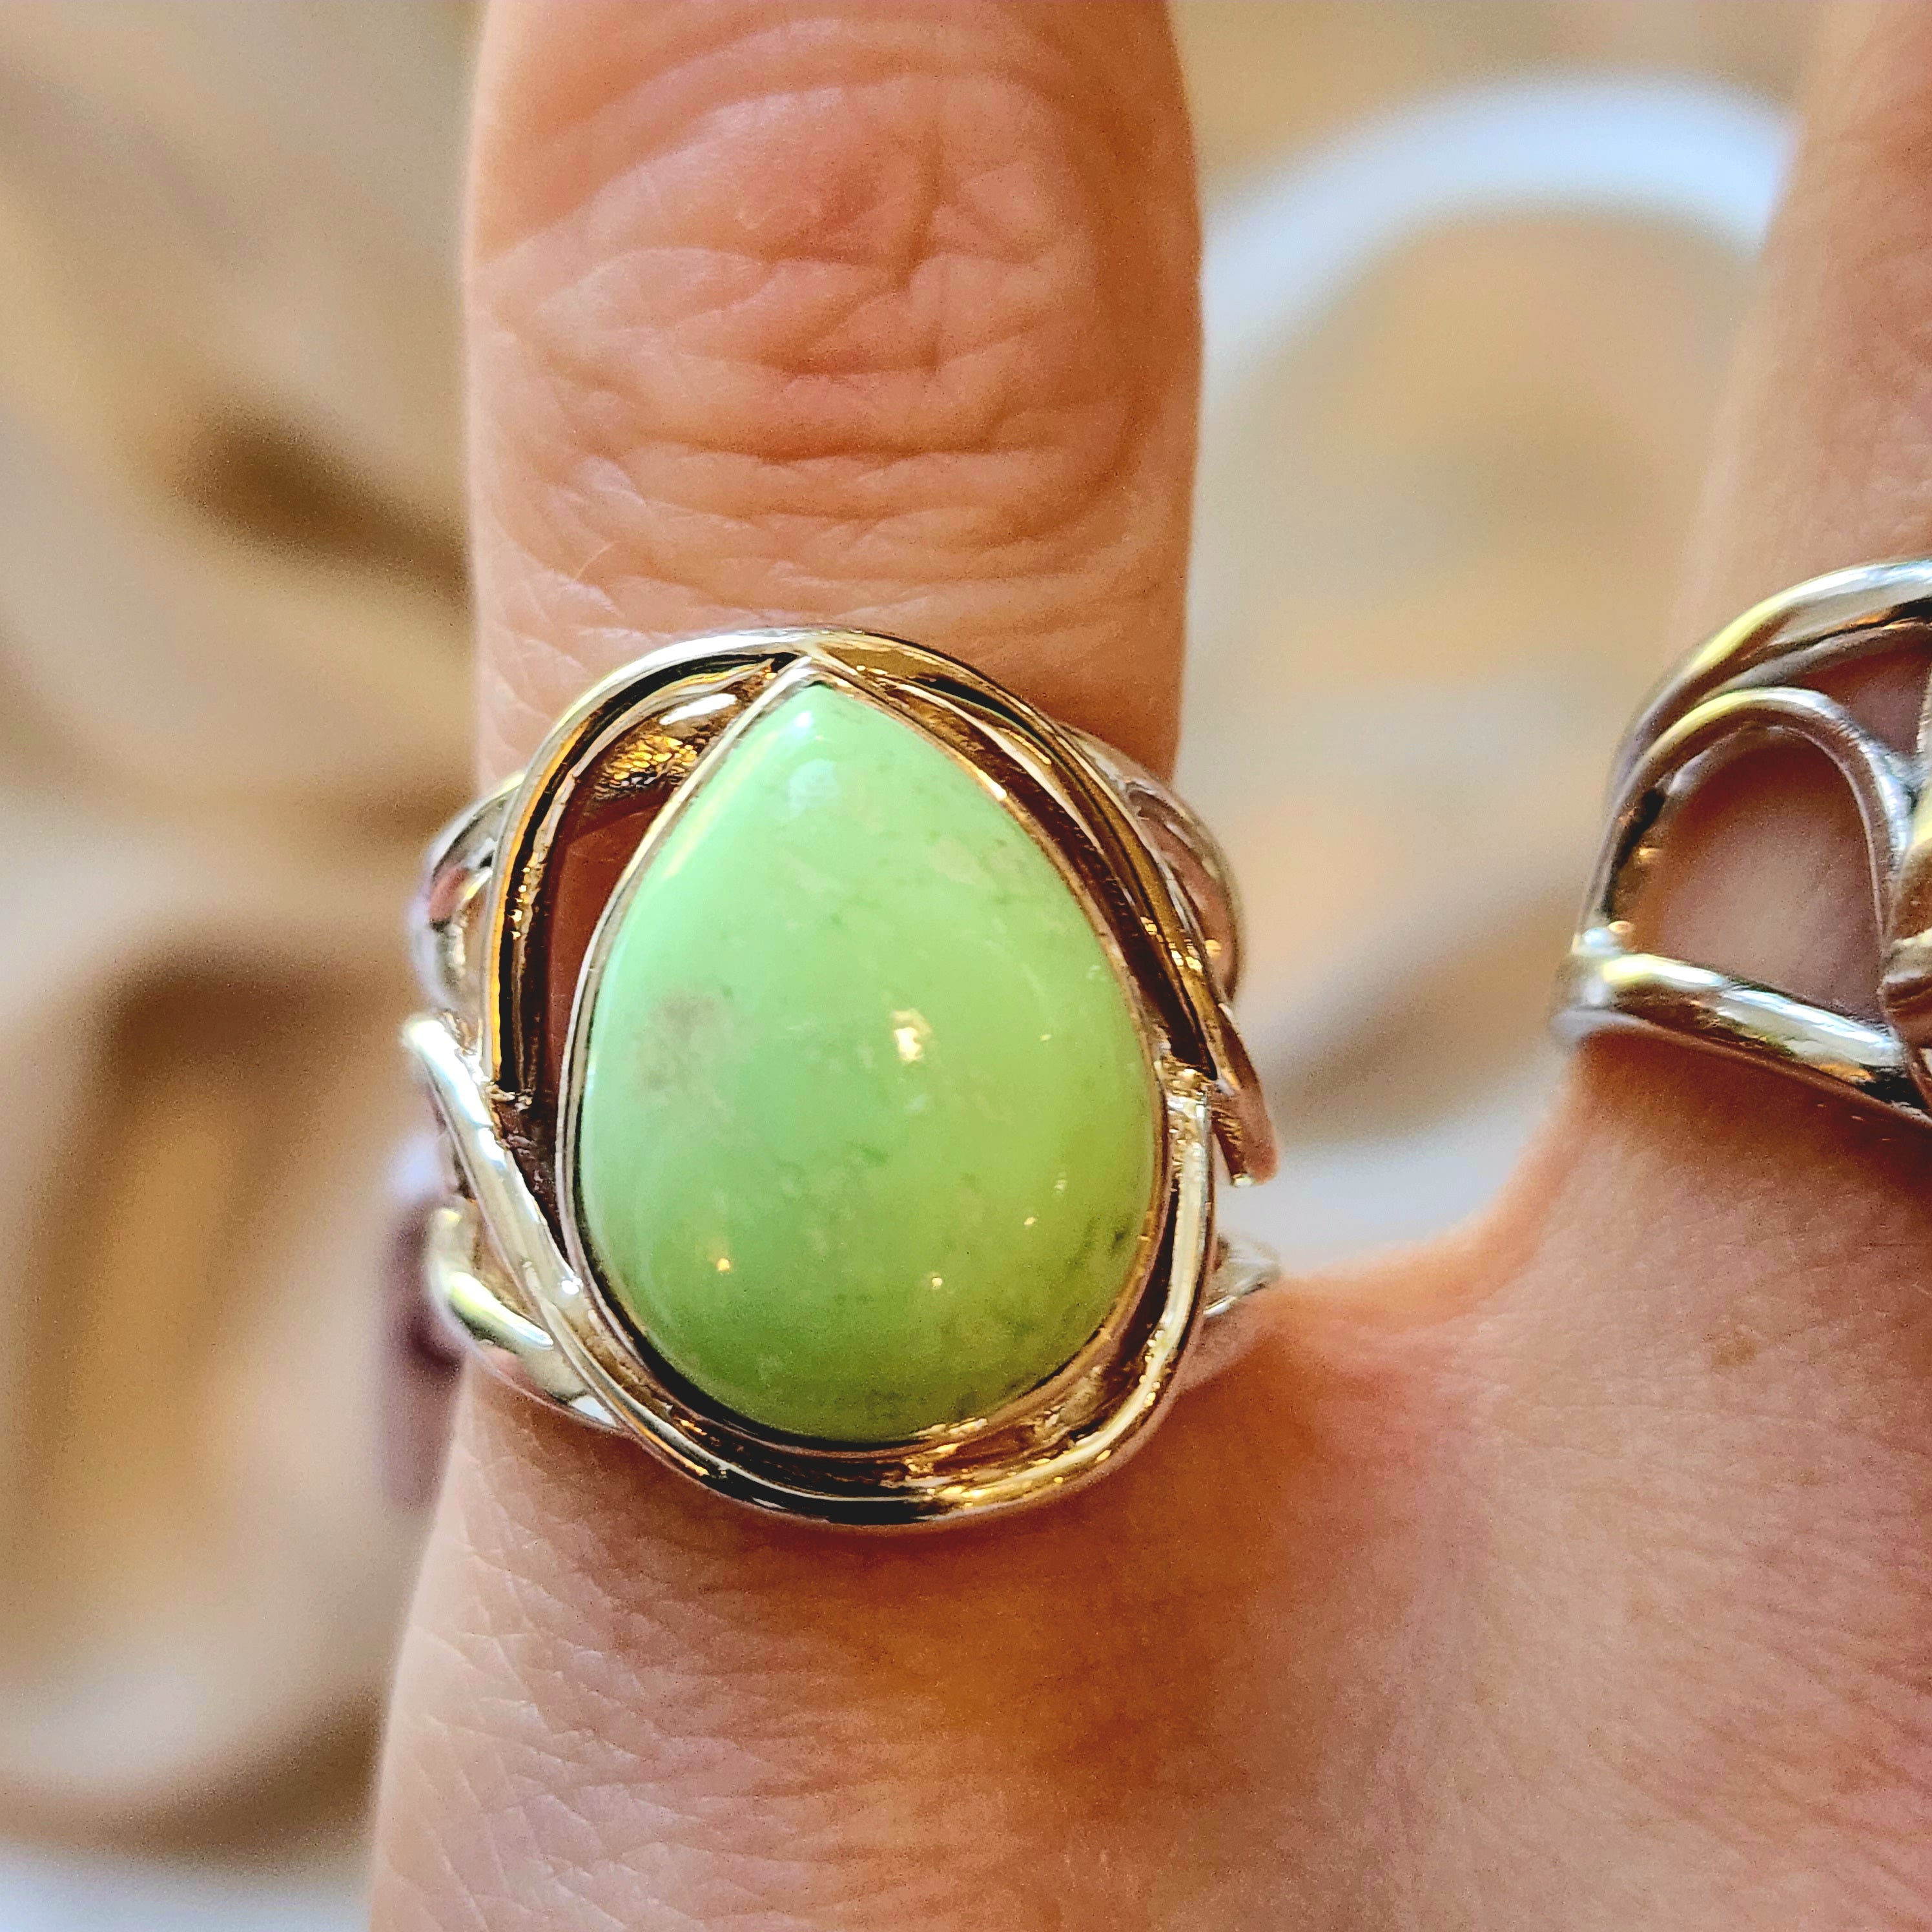 Citron Chrysoprase Finger Cuff Adjustable Ring .925 Sterling Silver for Compassion, Joy and Kindness